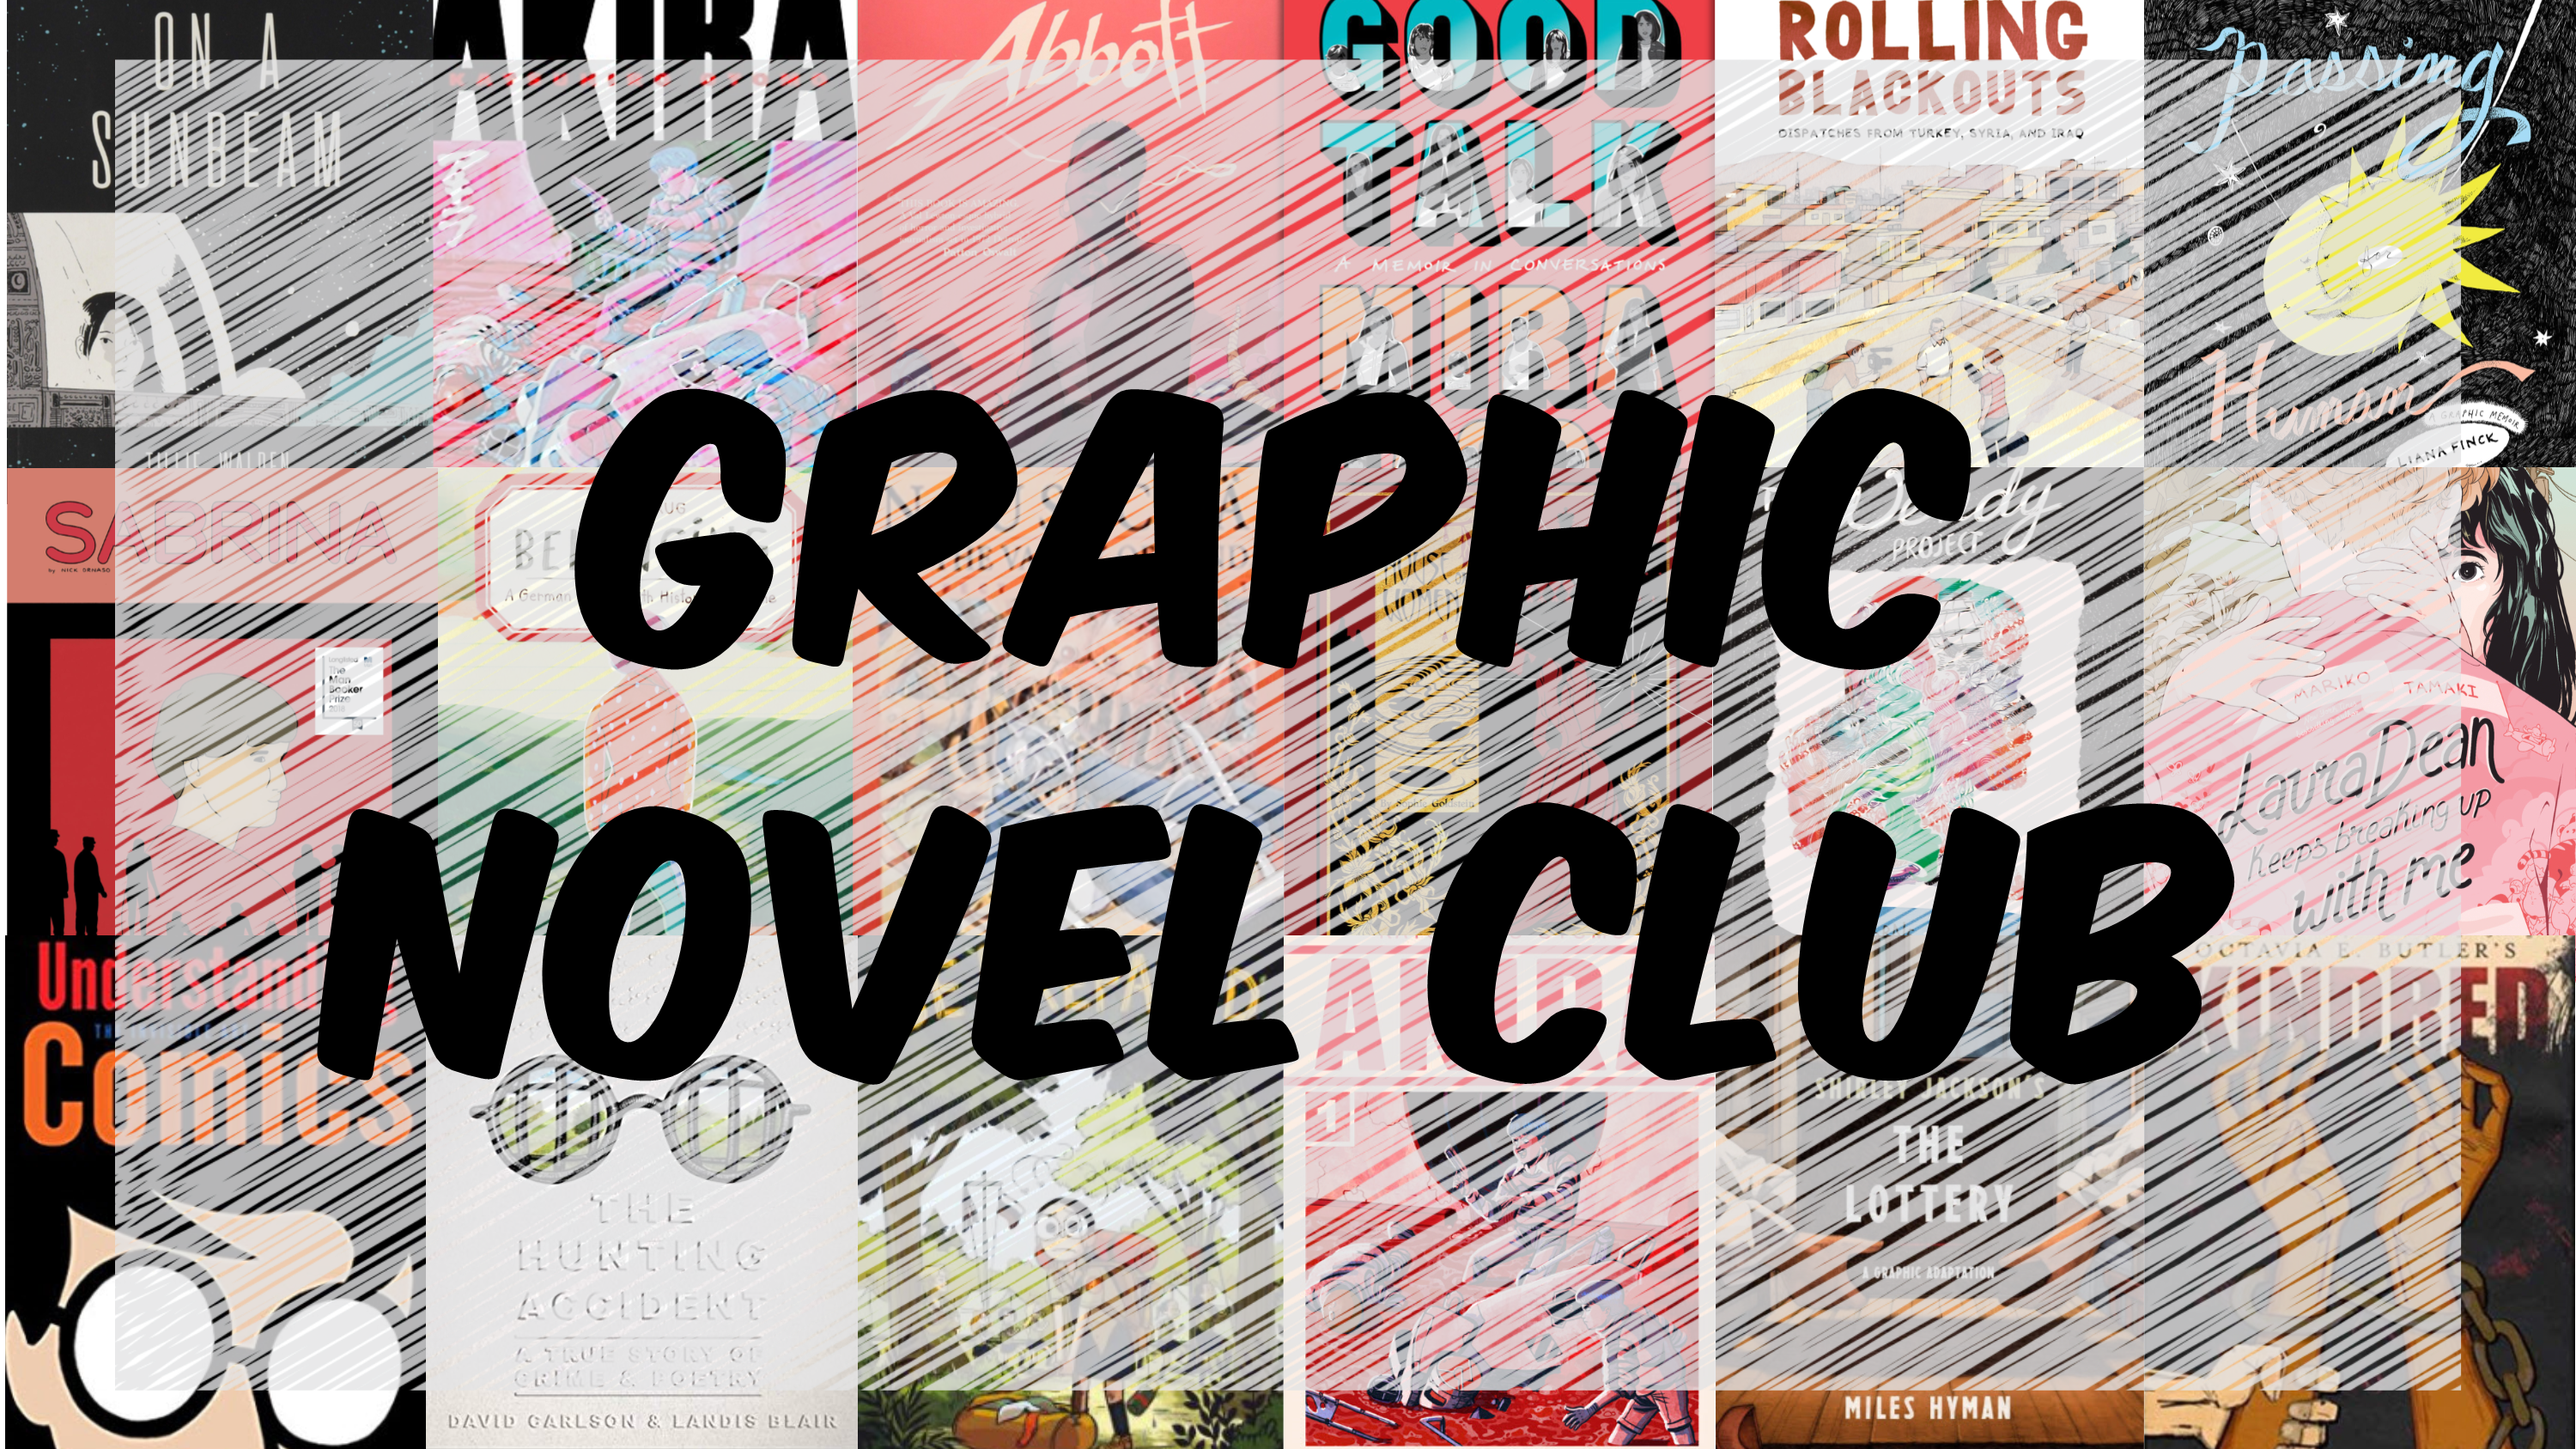 Graphic Novel Club with background of graphic novel covers